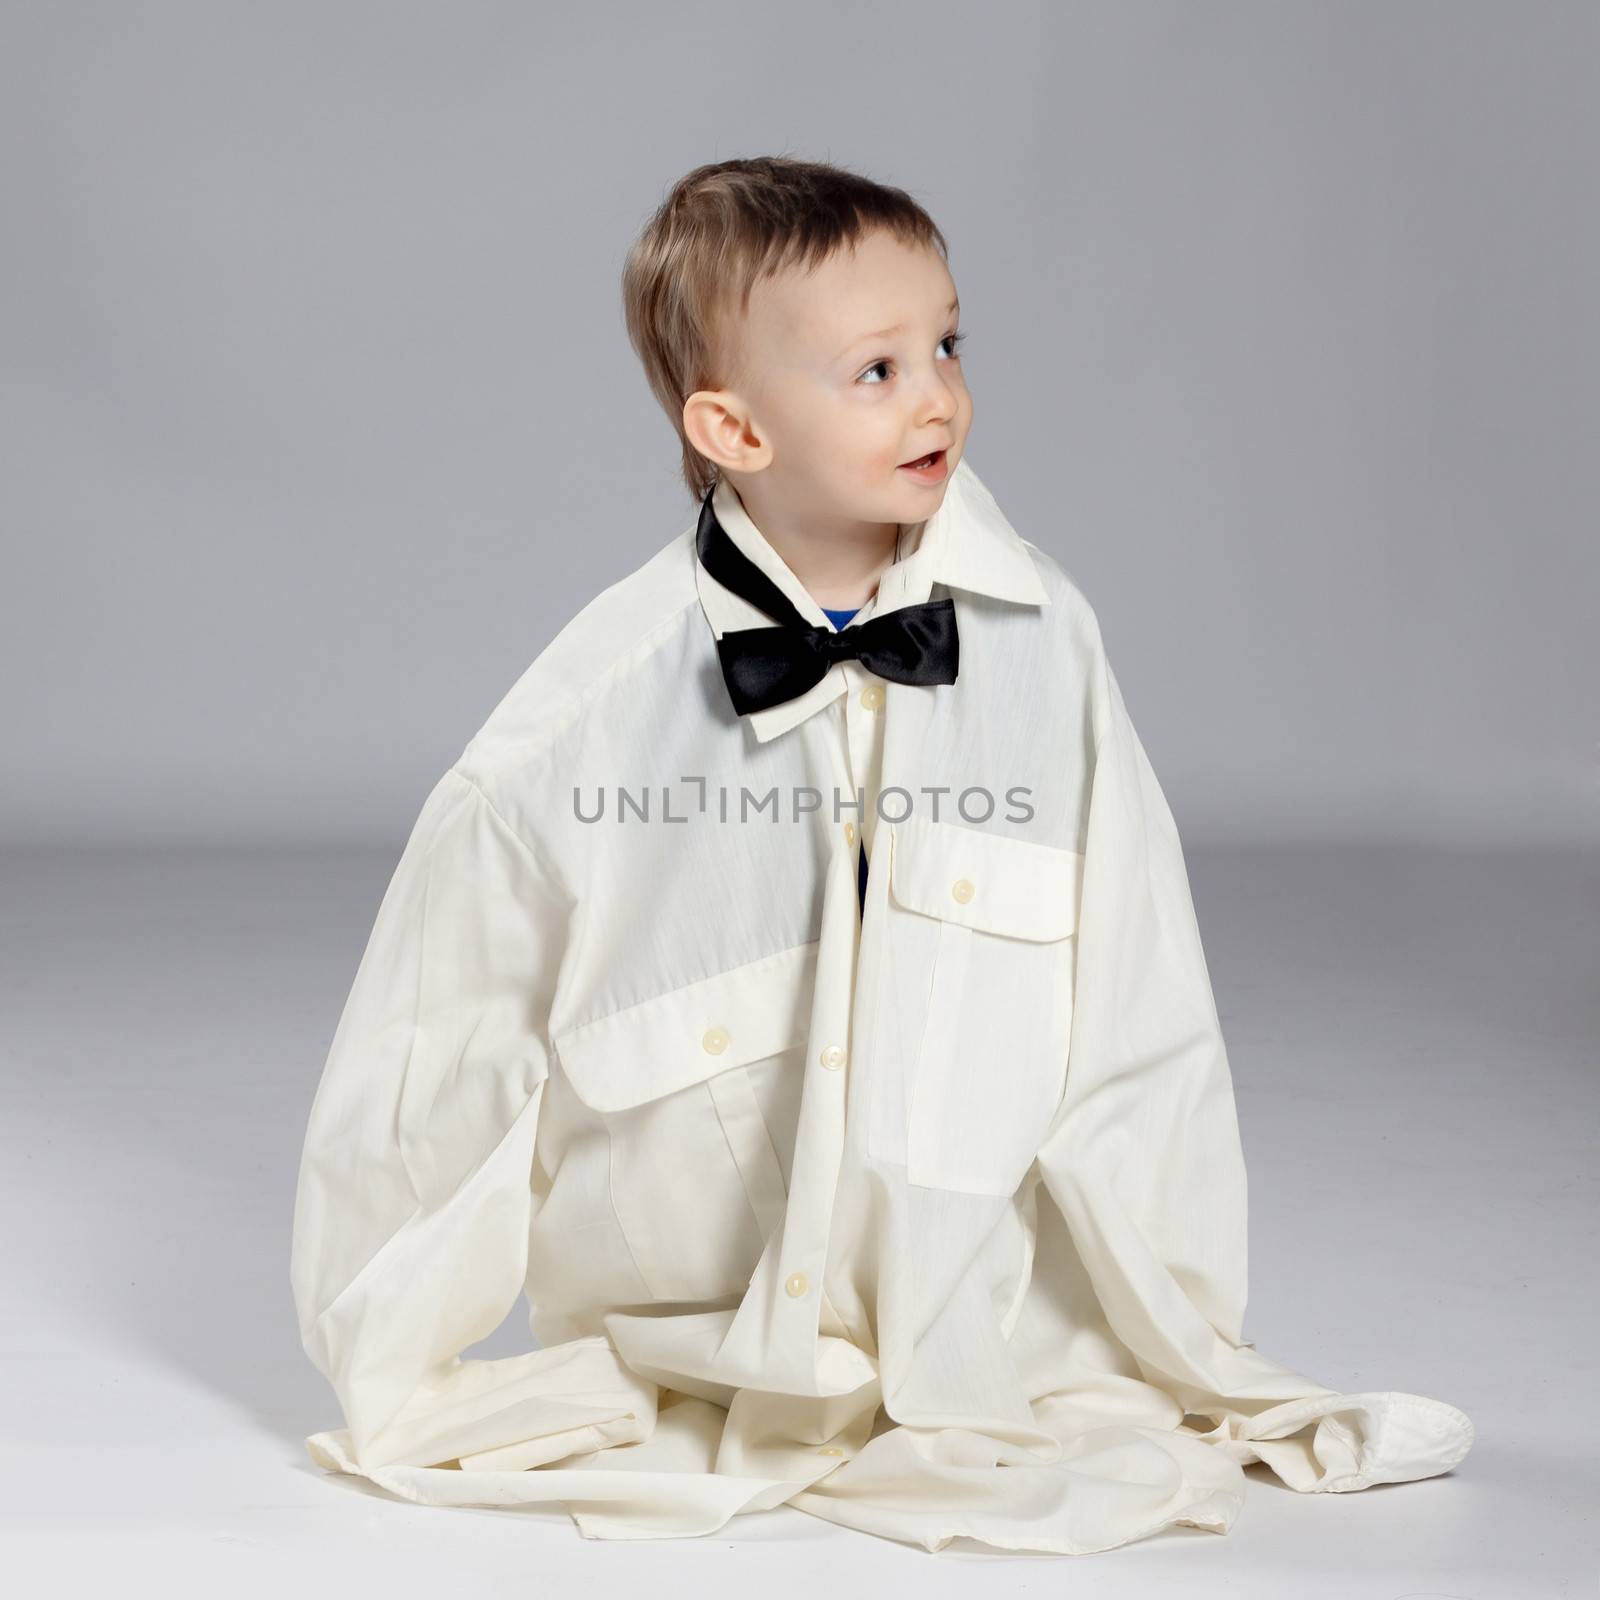 Boy toddler businessman, standing dressed in grown-shirt with bow tie